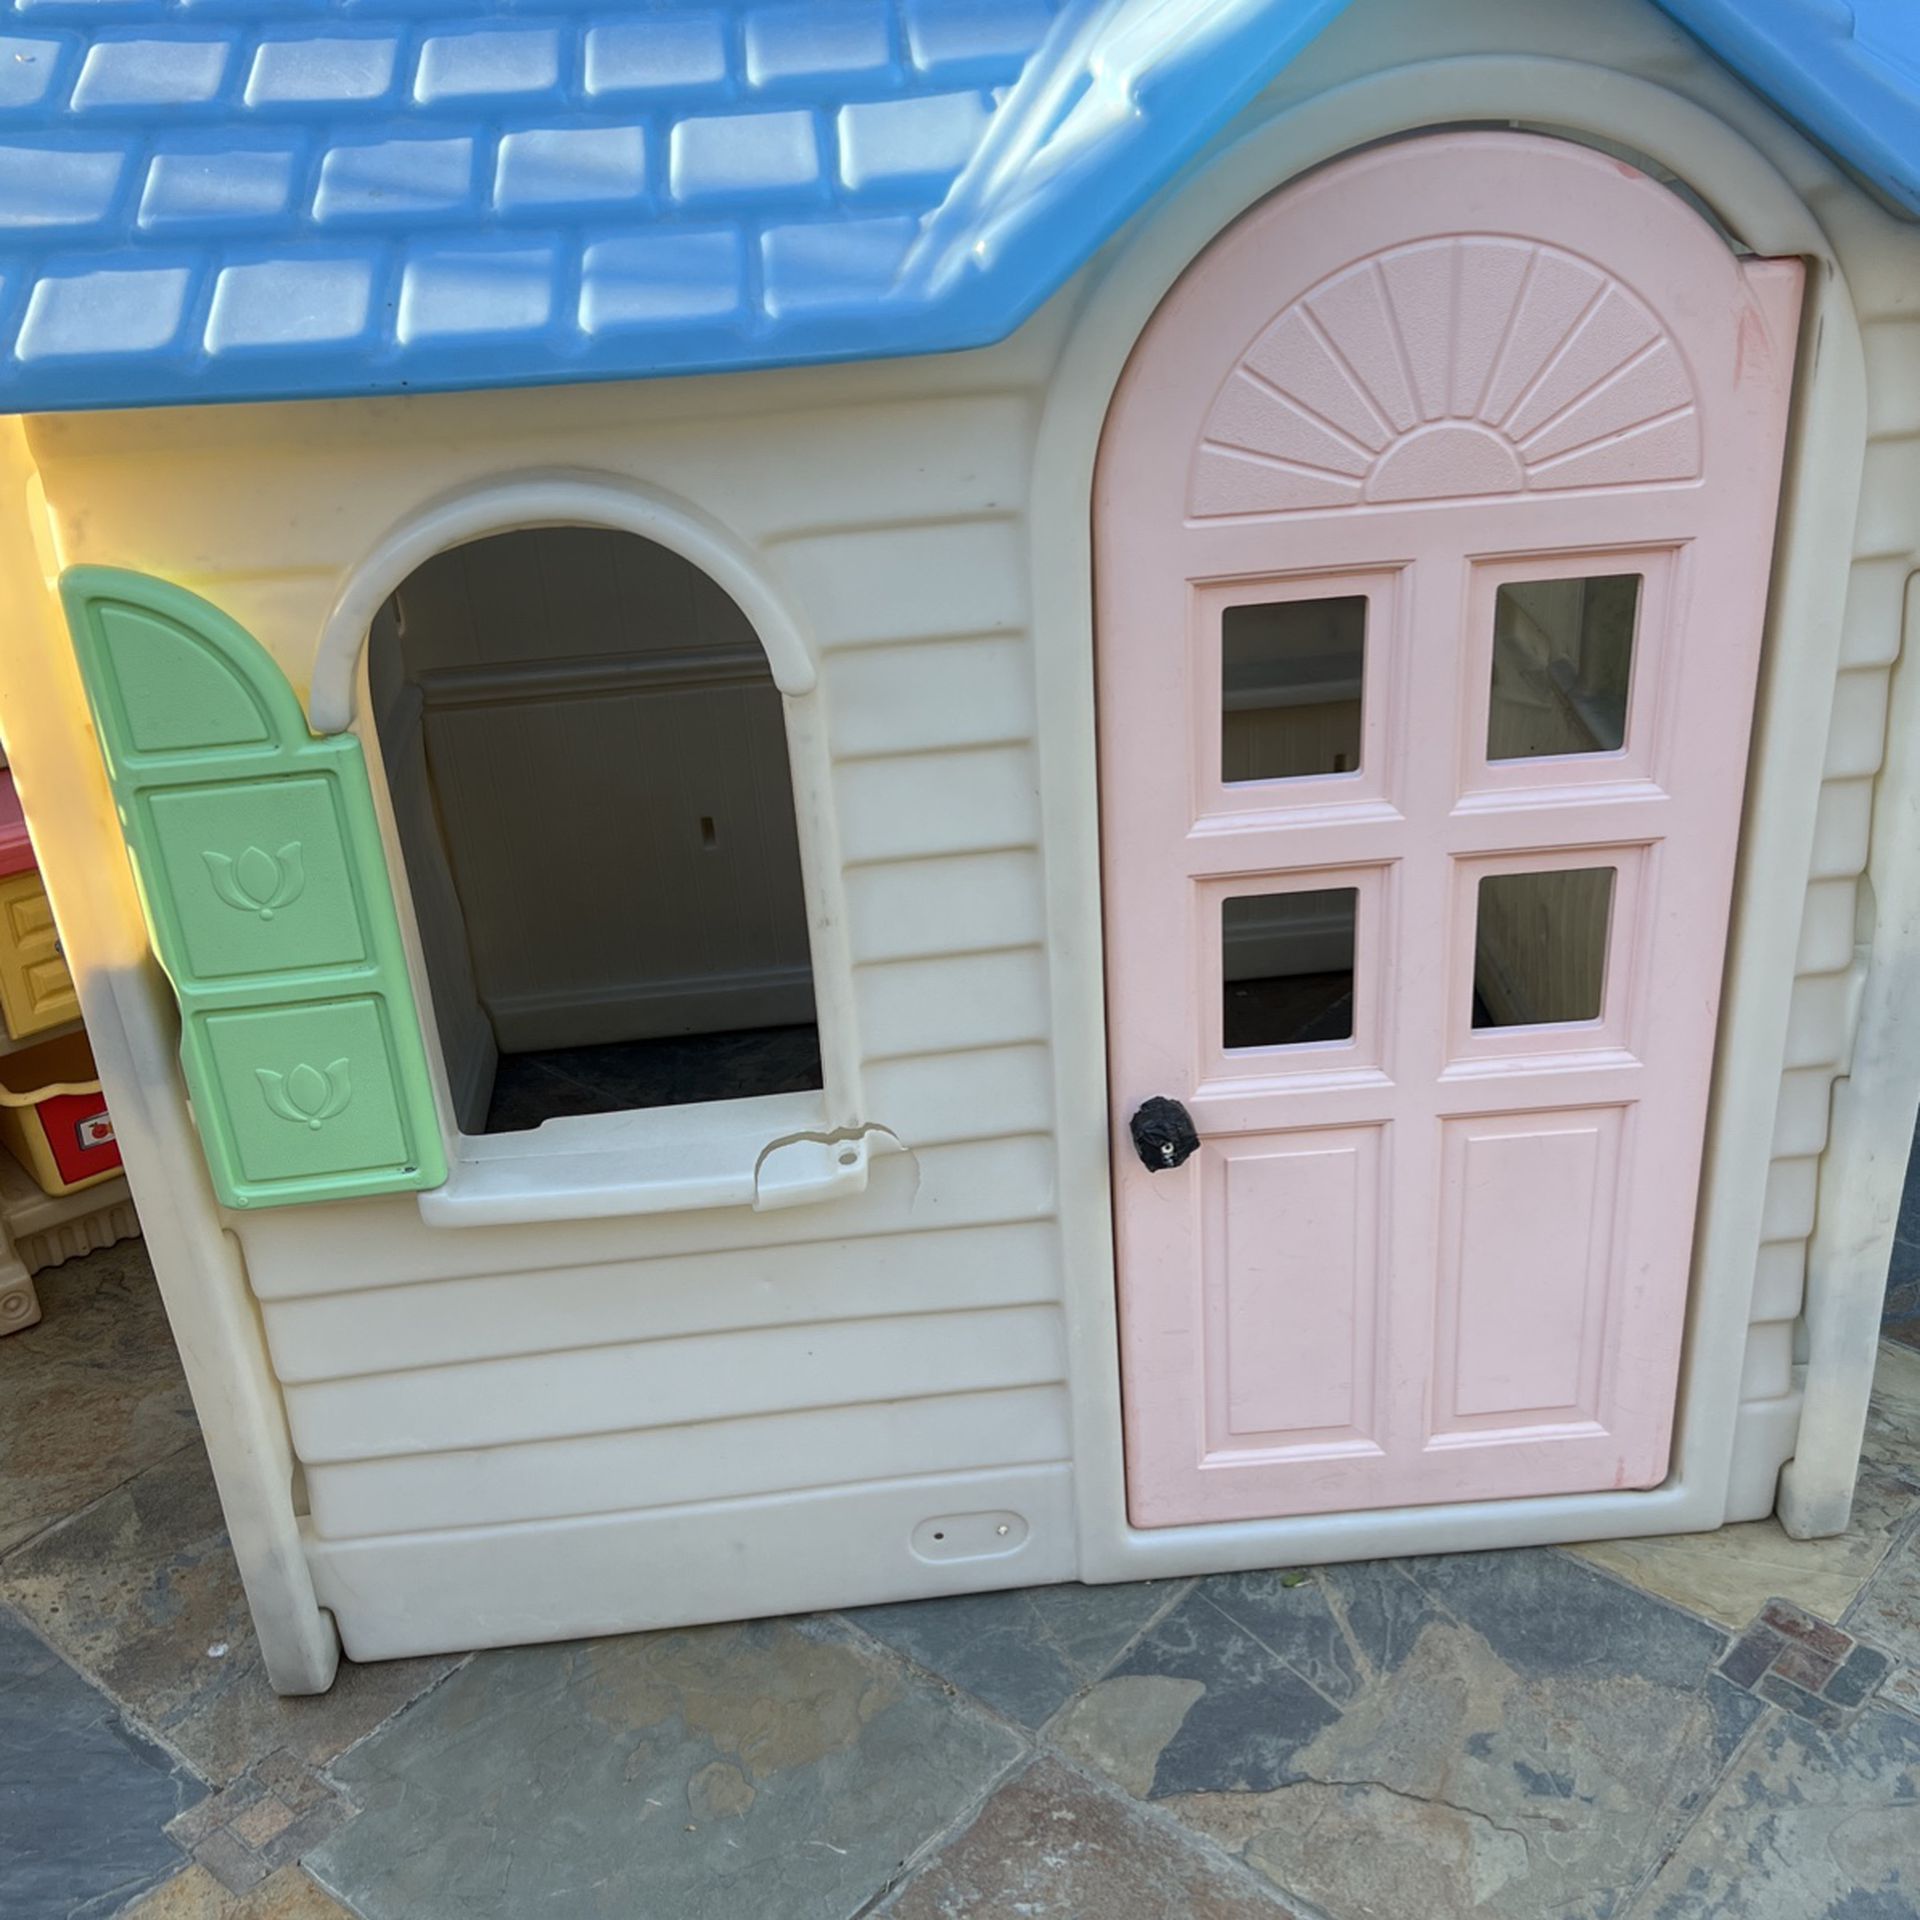 Play House In Good Condition Free